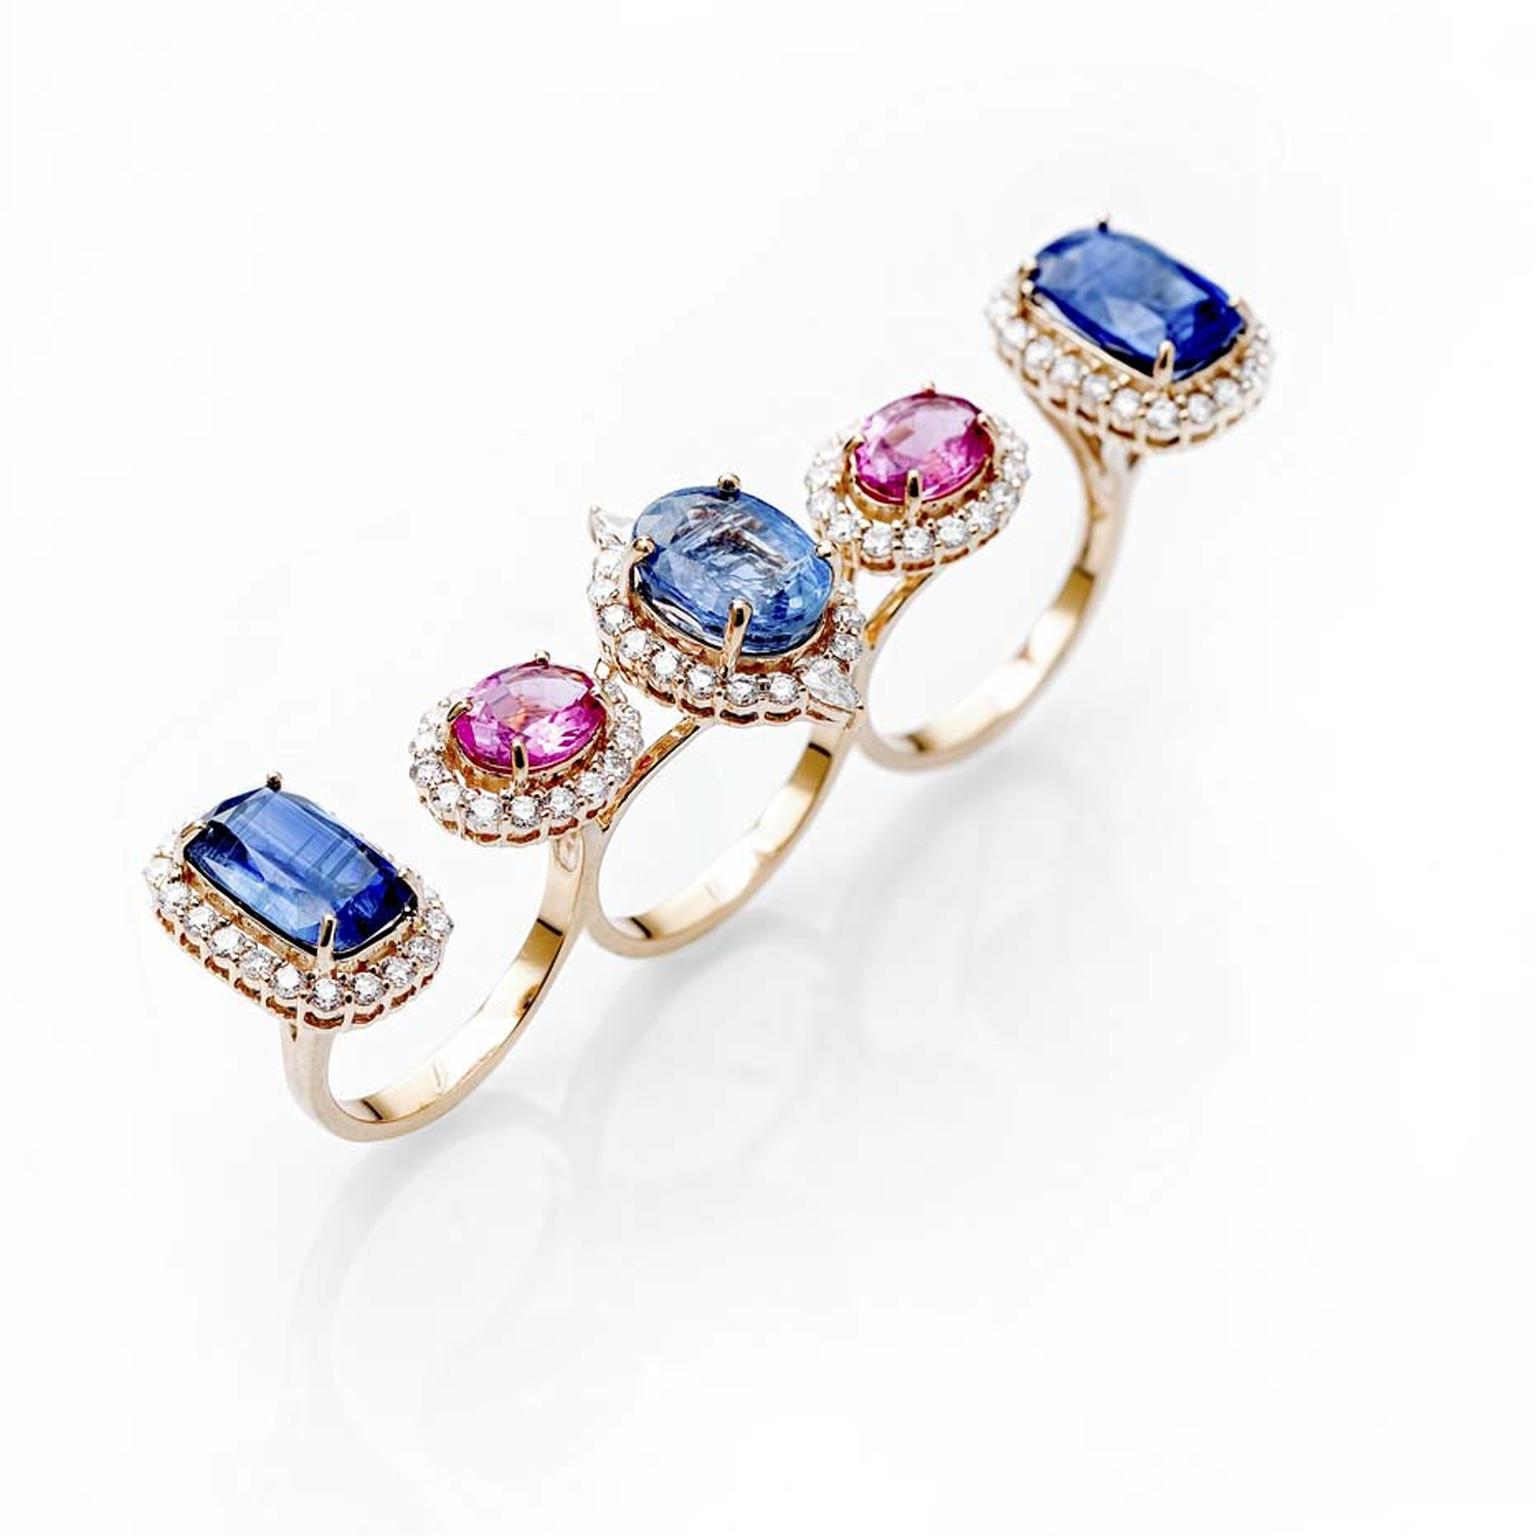 A multi-finger kyanite, rubellite and diamond Farah Khan ring in yellow gold from the new Le Jardin Exotique summer jewellery collection.